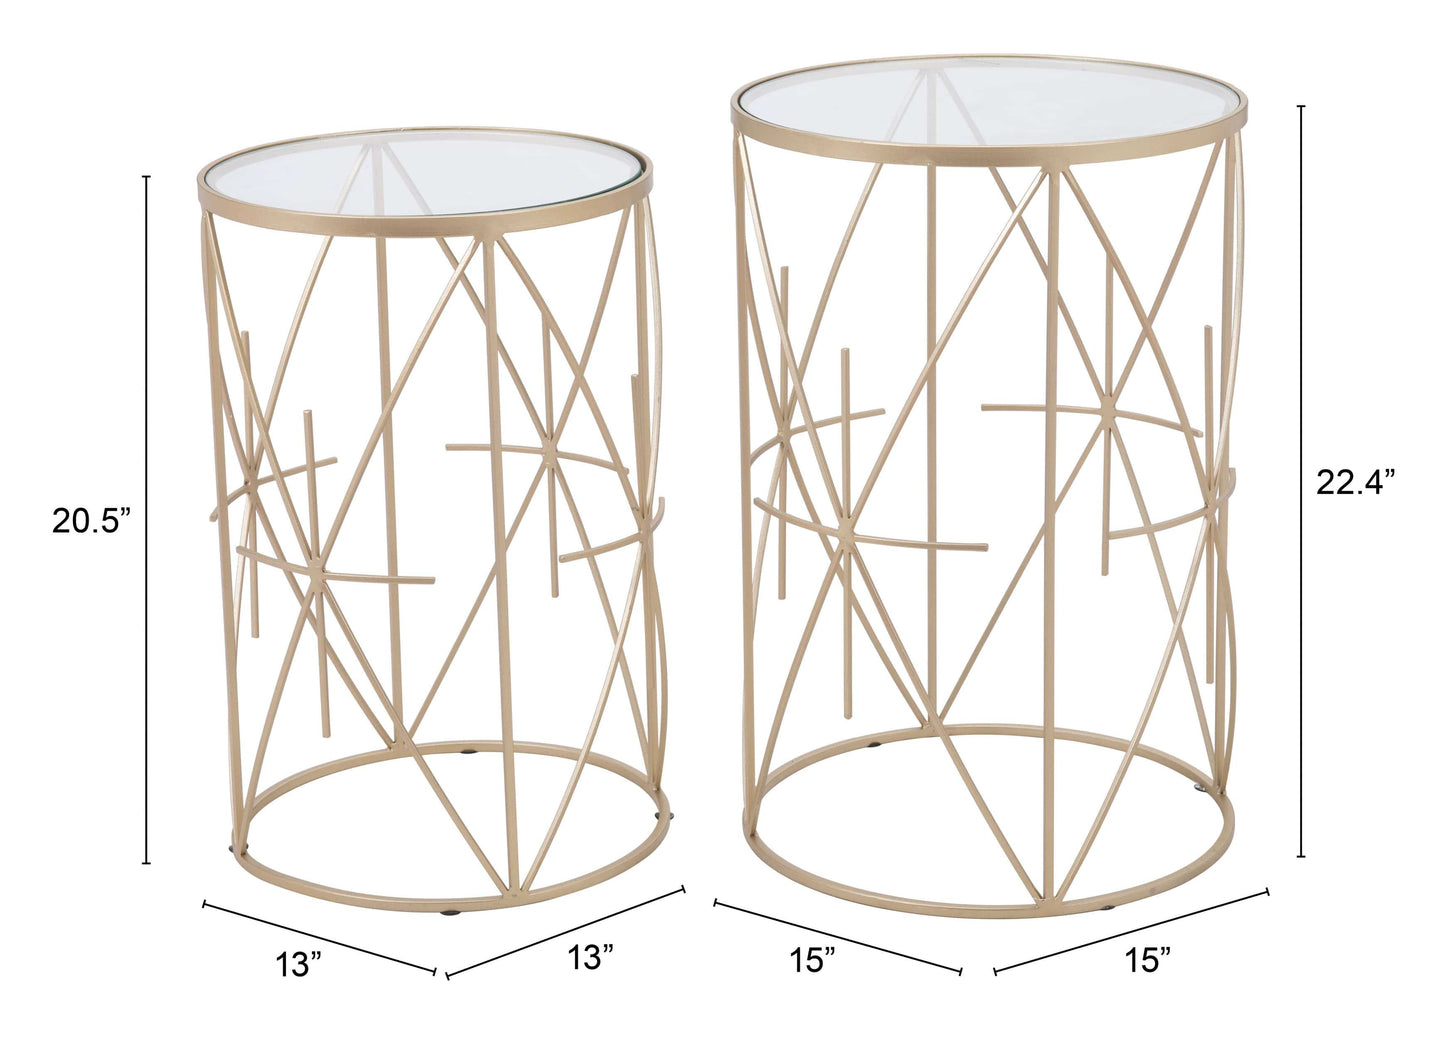 Measurements of Hadrian Glam Tables